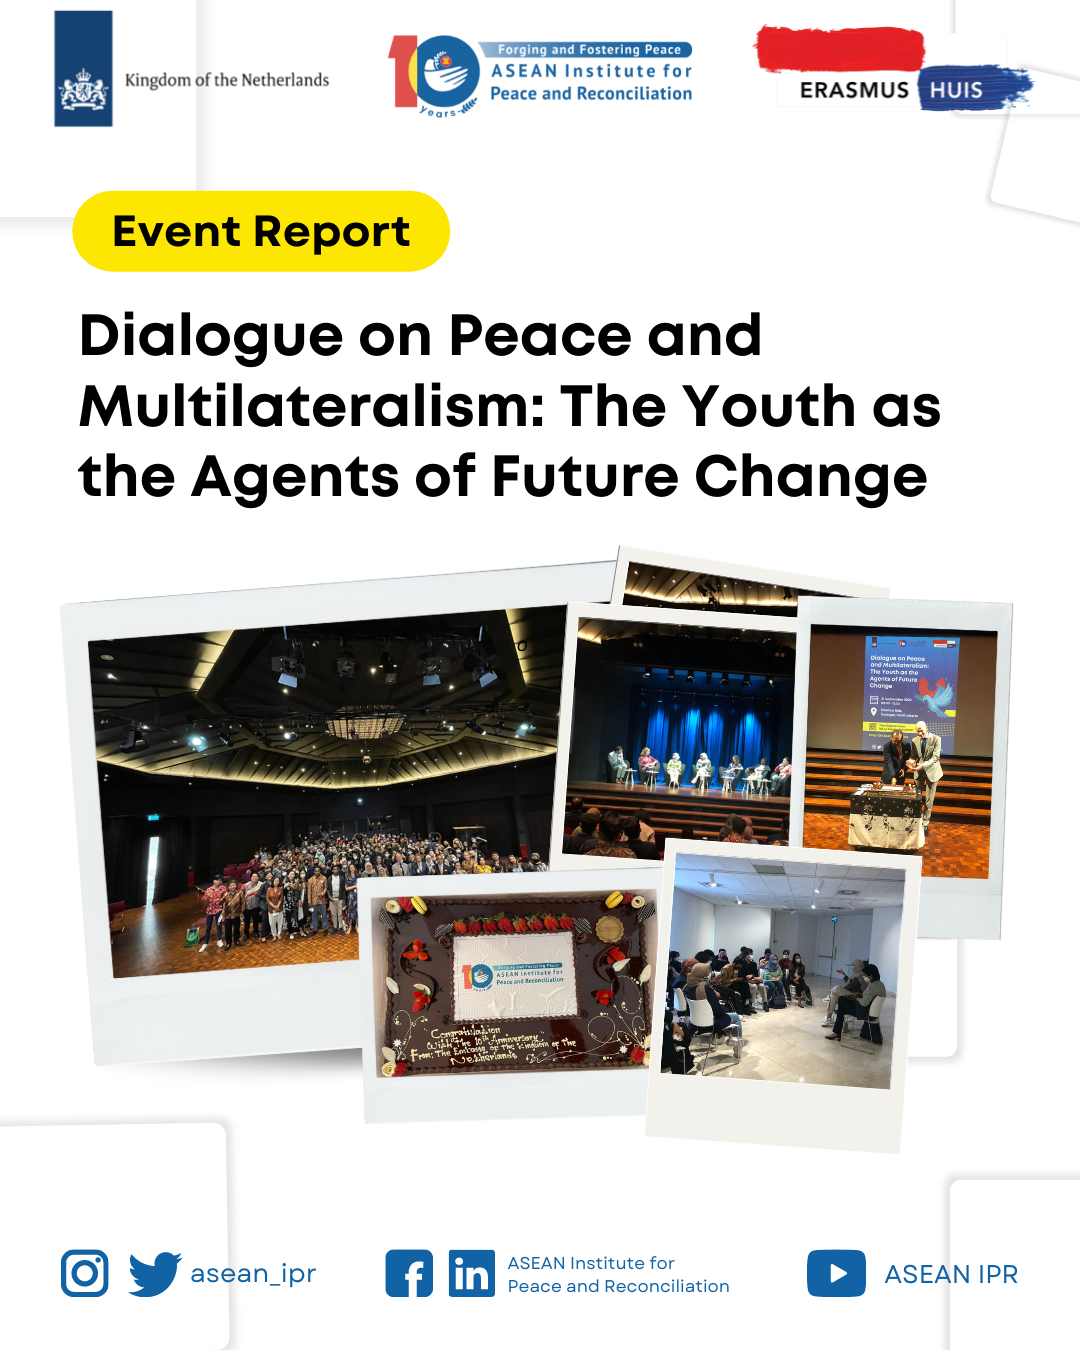 Dialogue on Peace and Multilateralism: The Youth as the Agents of Future Change